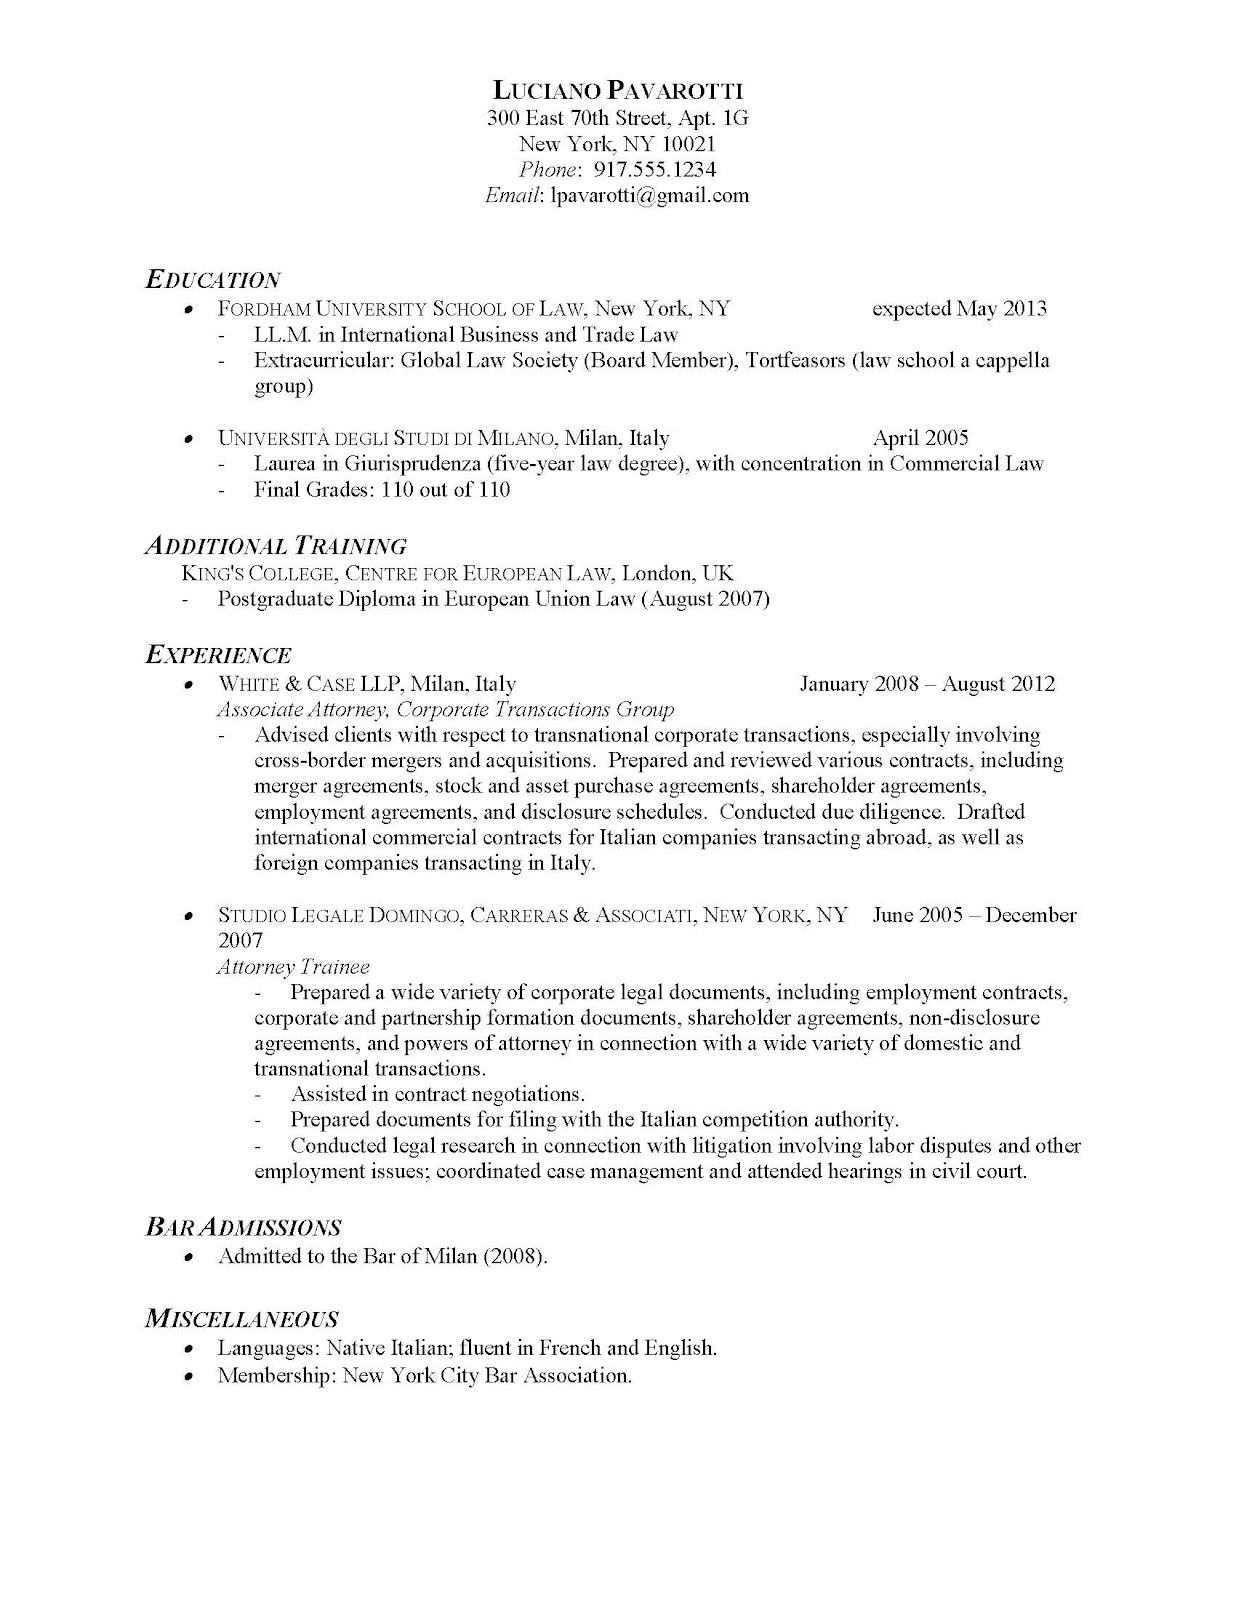 Foreign travel in resume